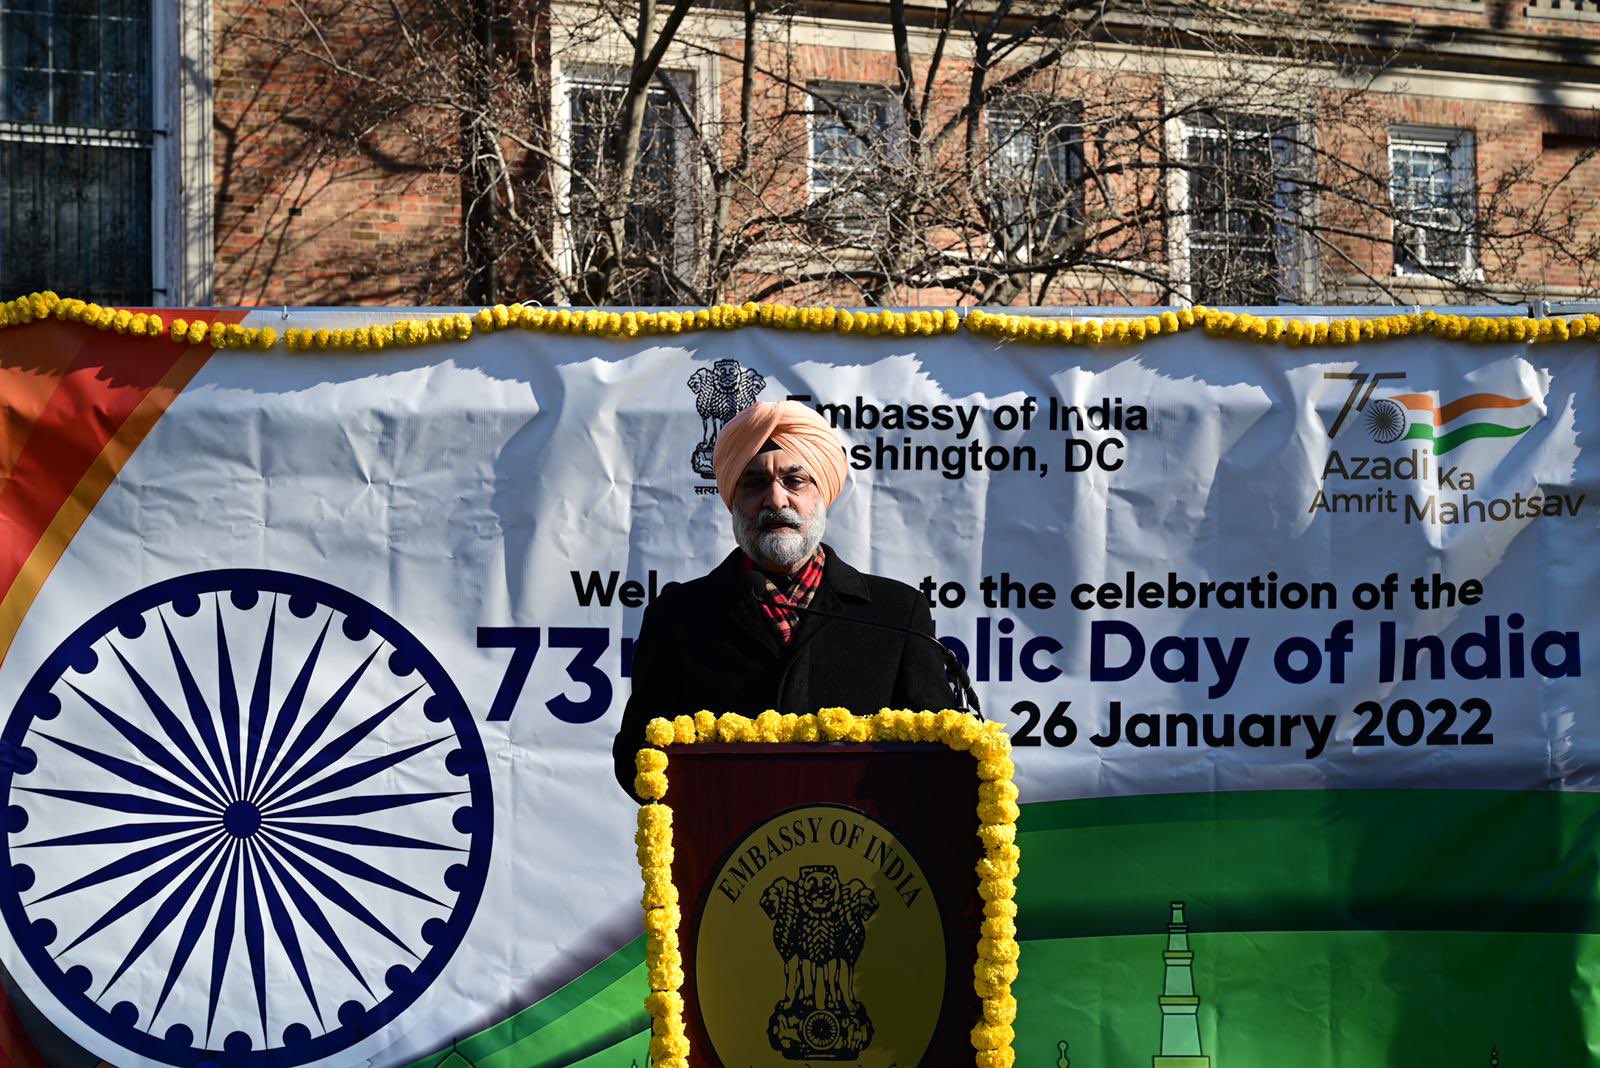 Indian Embassy, Consulates and community celebrate 73rd Republic Day of India